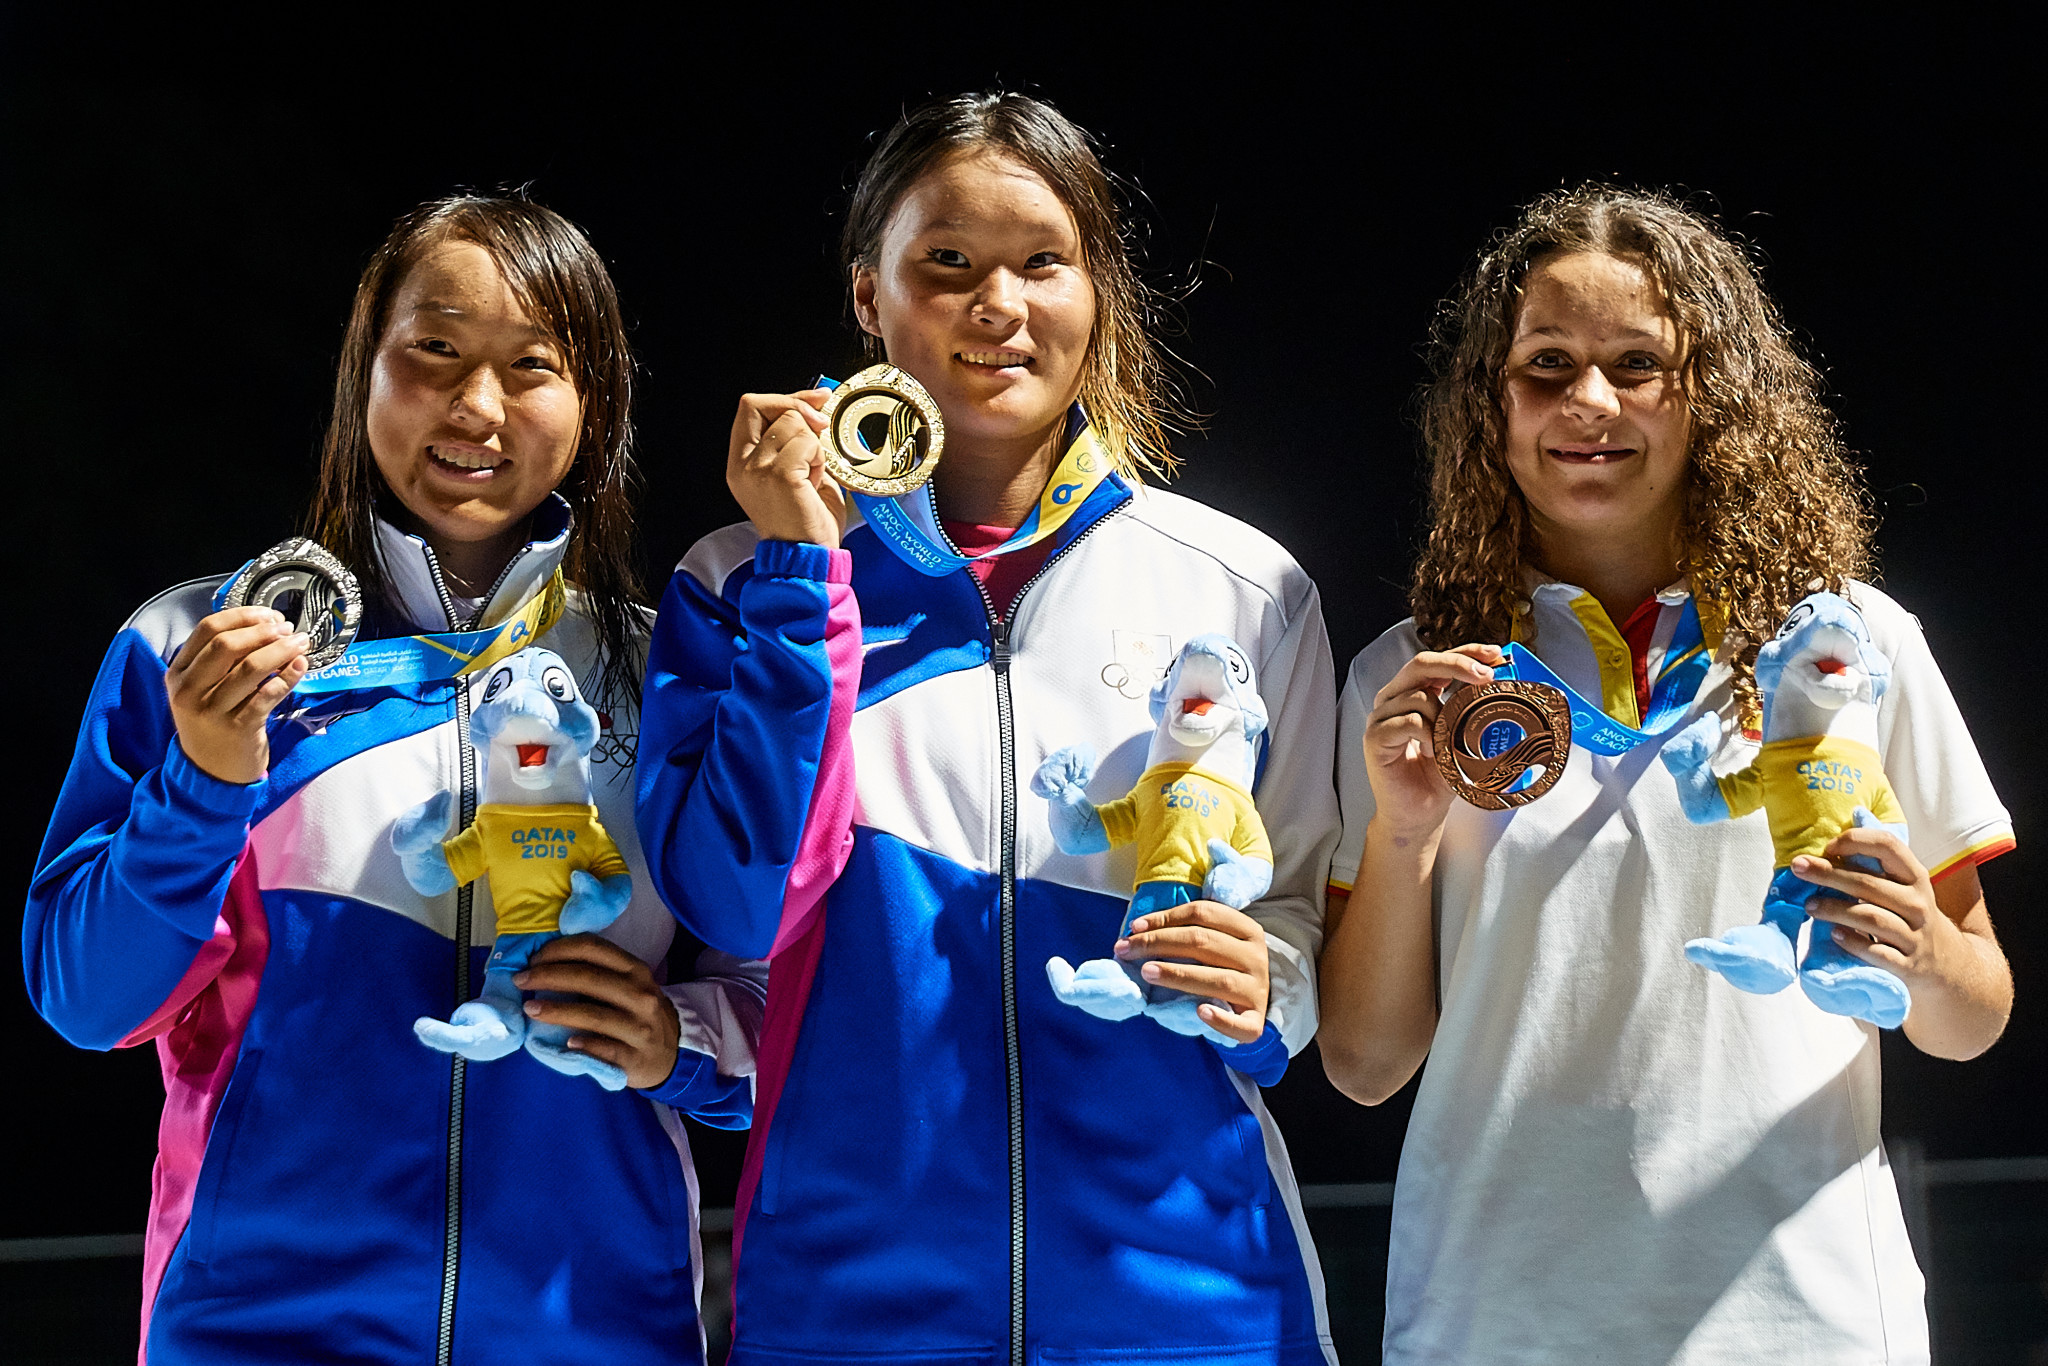 Sakurai Yosozumi, centre, was joined on the podium by team-mate Kihana Ogawa, who won the silver medal, and Spain's Julia Benedetti, who took bronze ©ANOC World Beach Games